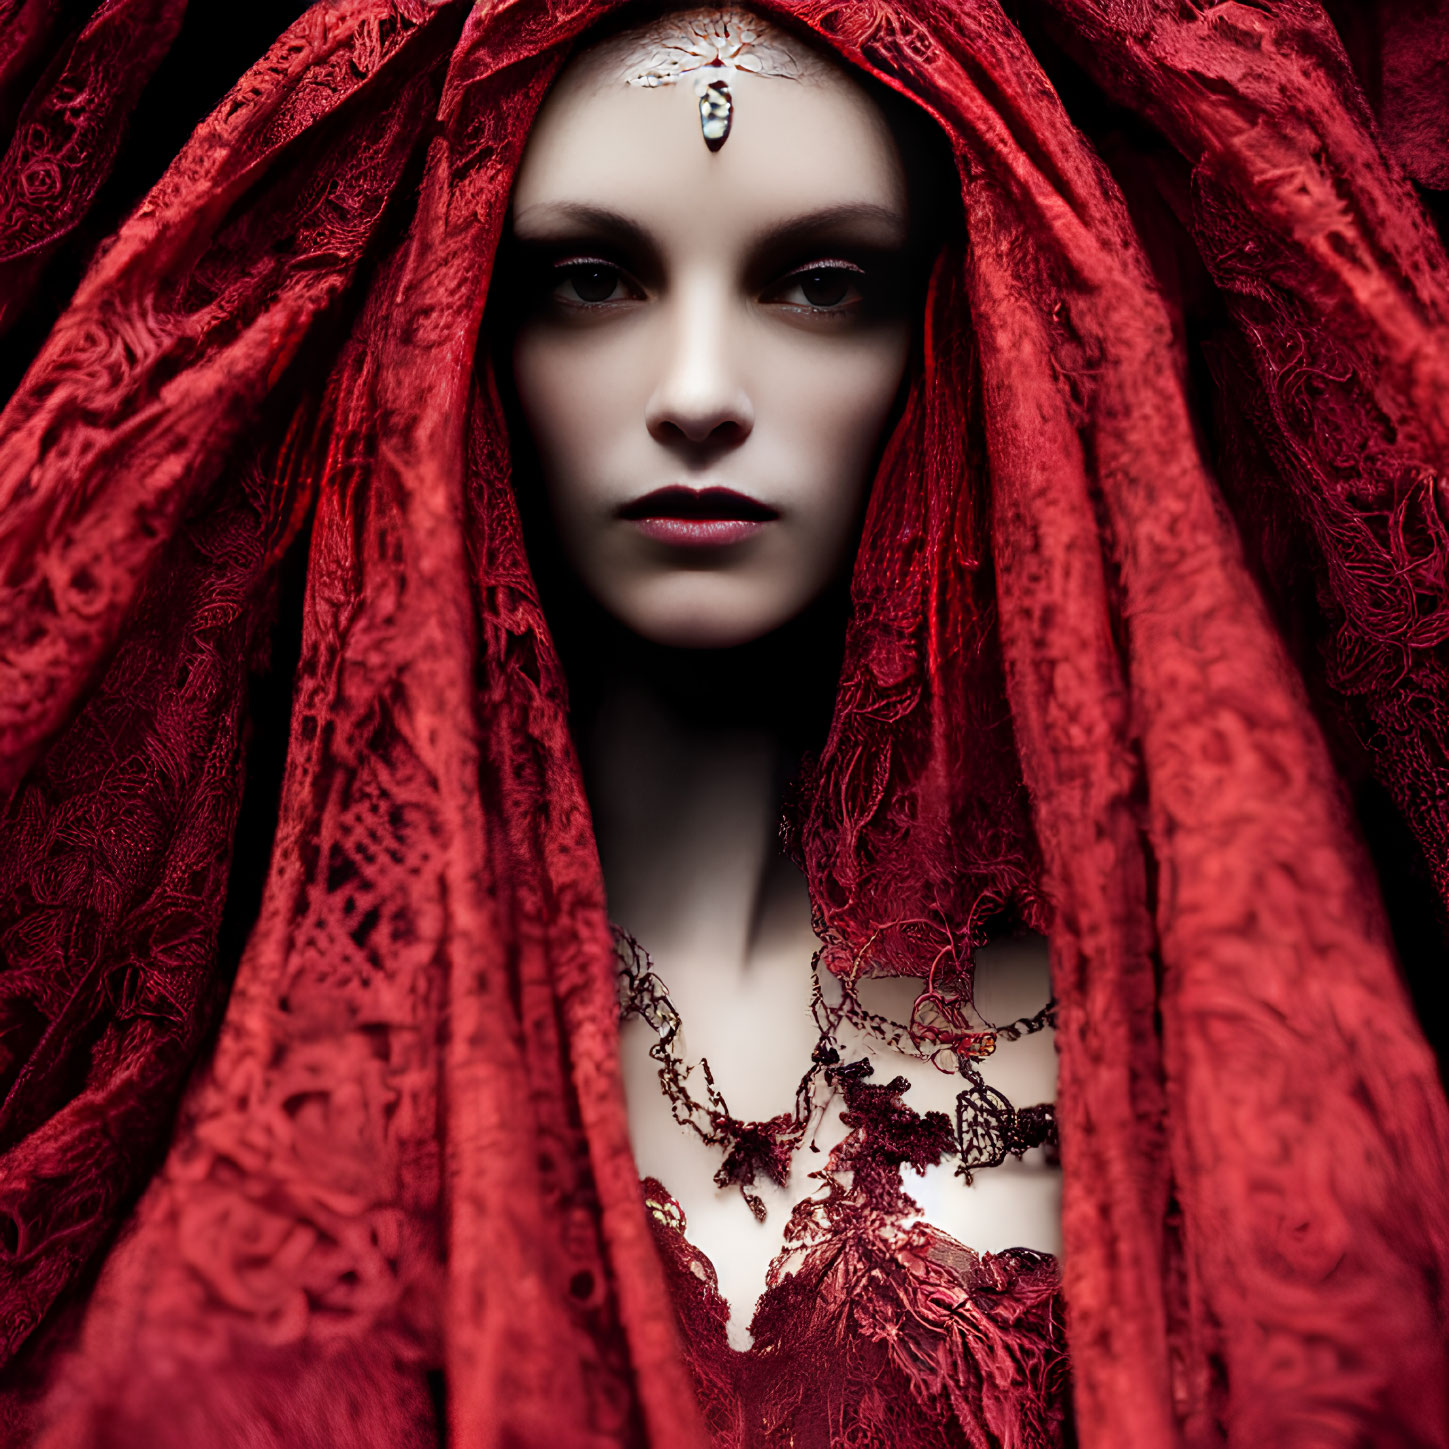 Intense gaze of woman in red lace shawl with forehead piece